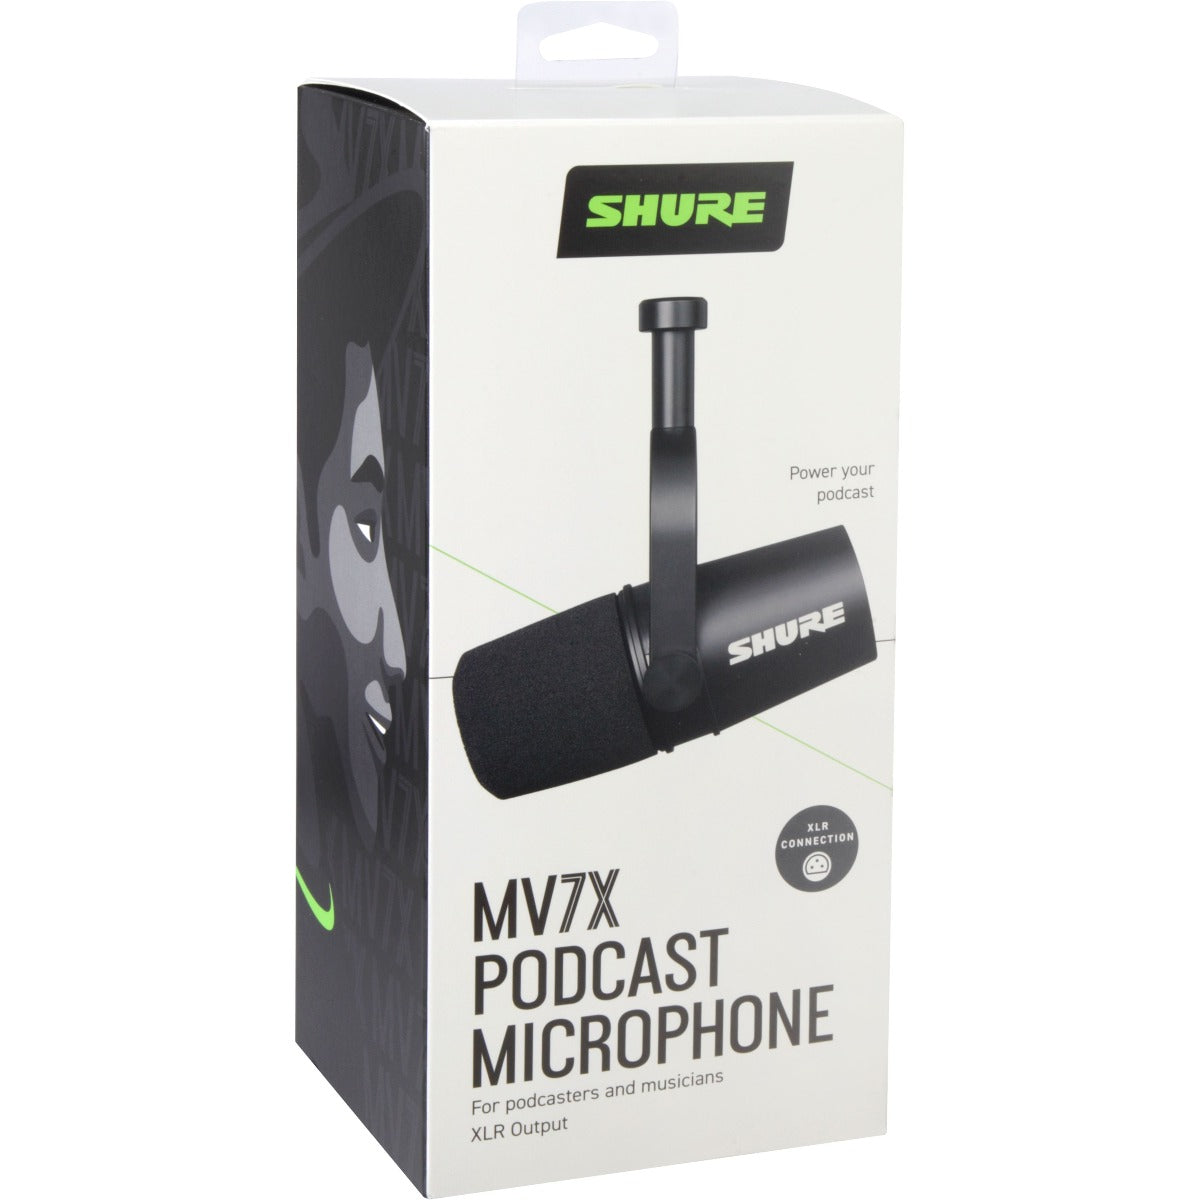 Shure MV7X Podcast Microphone View 8